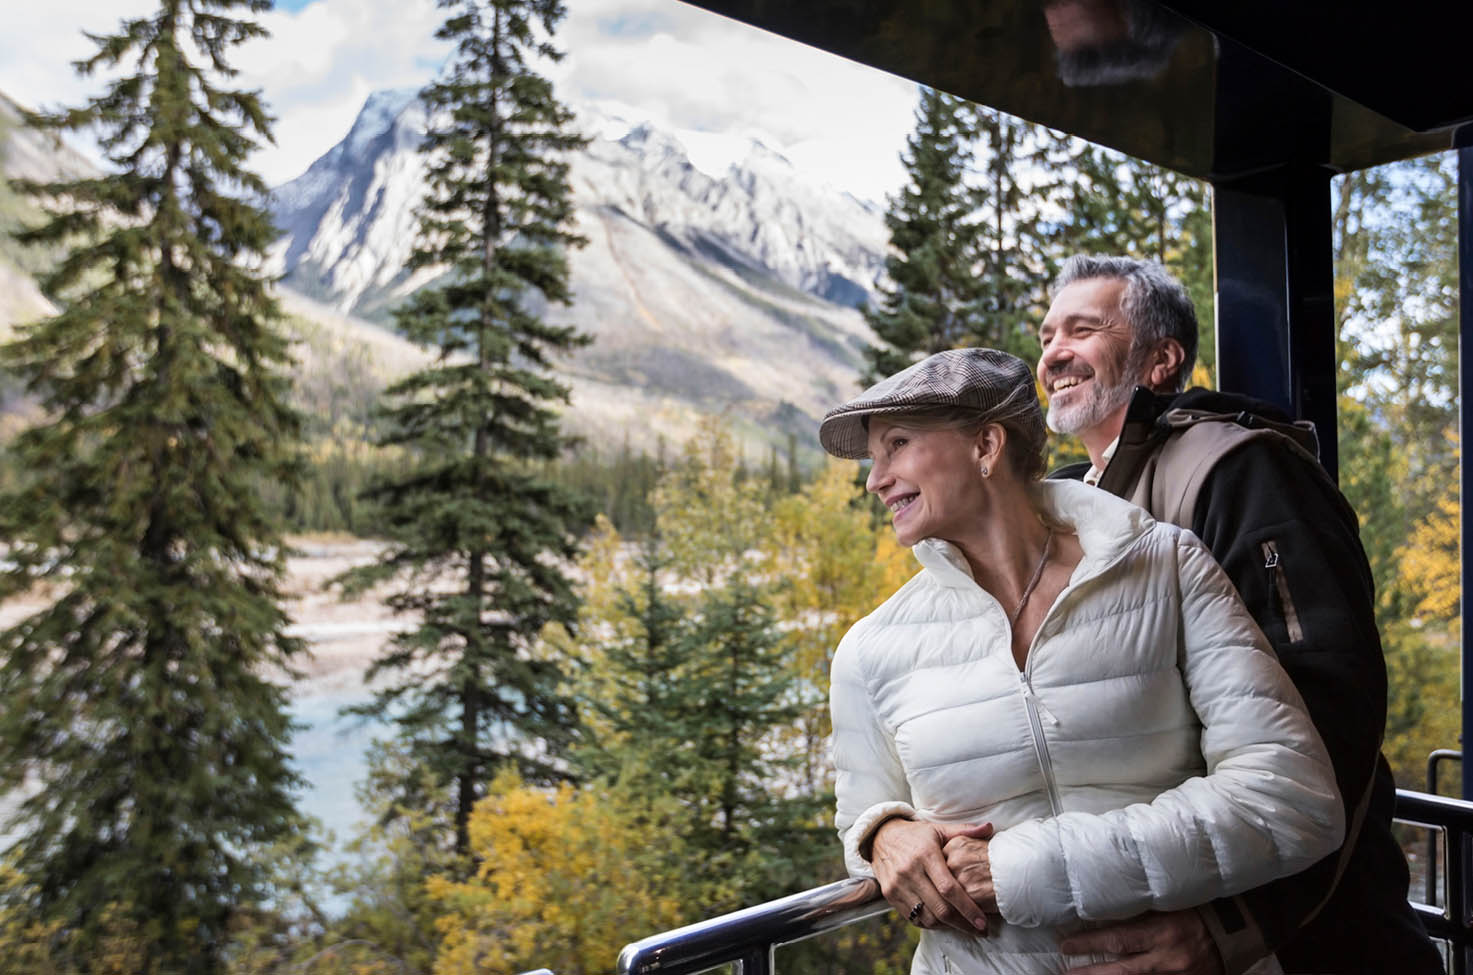 A couple stand smiling looking out of the viewing platform of the Rocky Mountaineer train as trees and mountains roll by